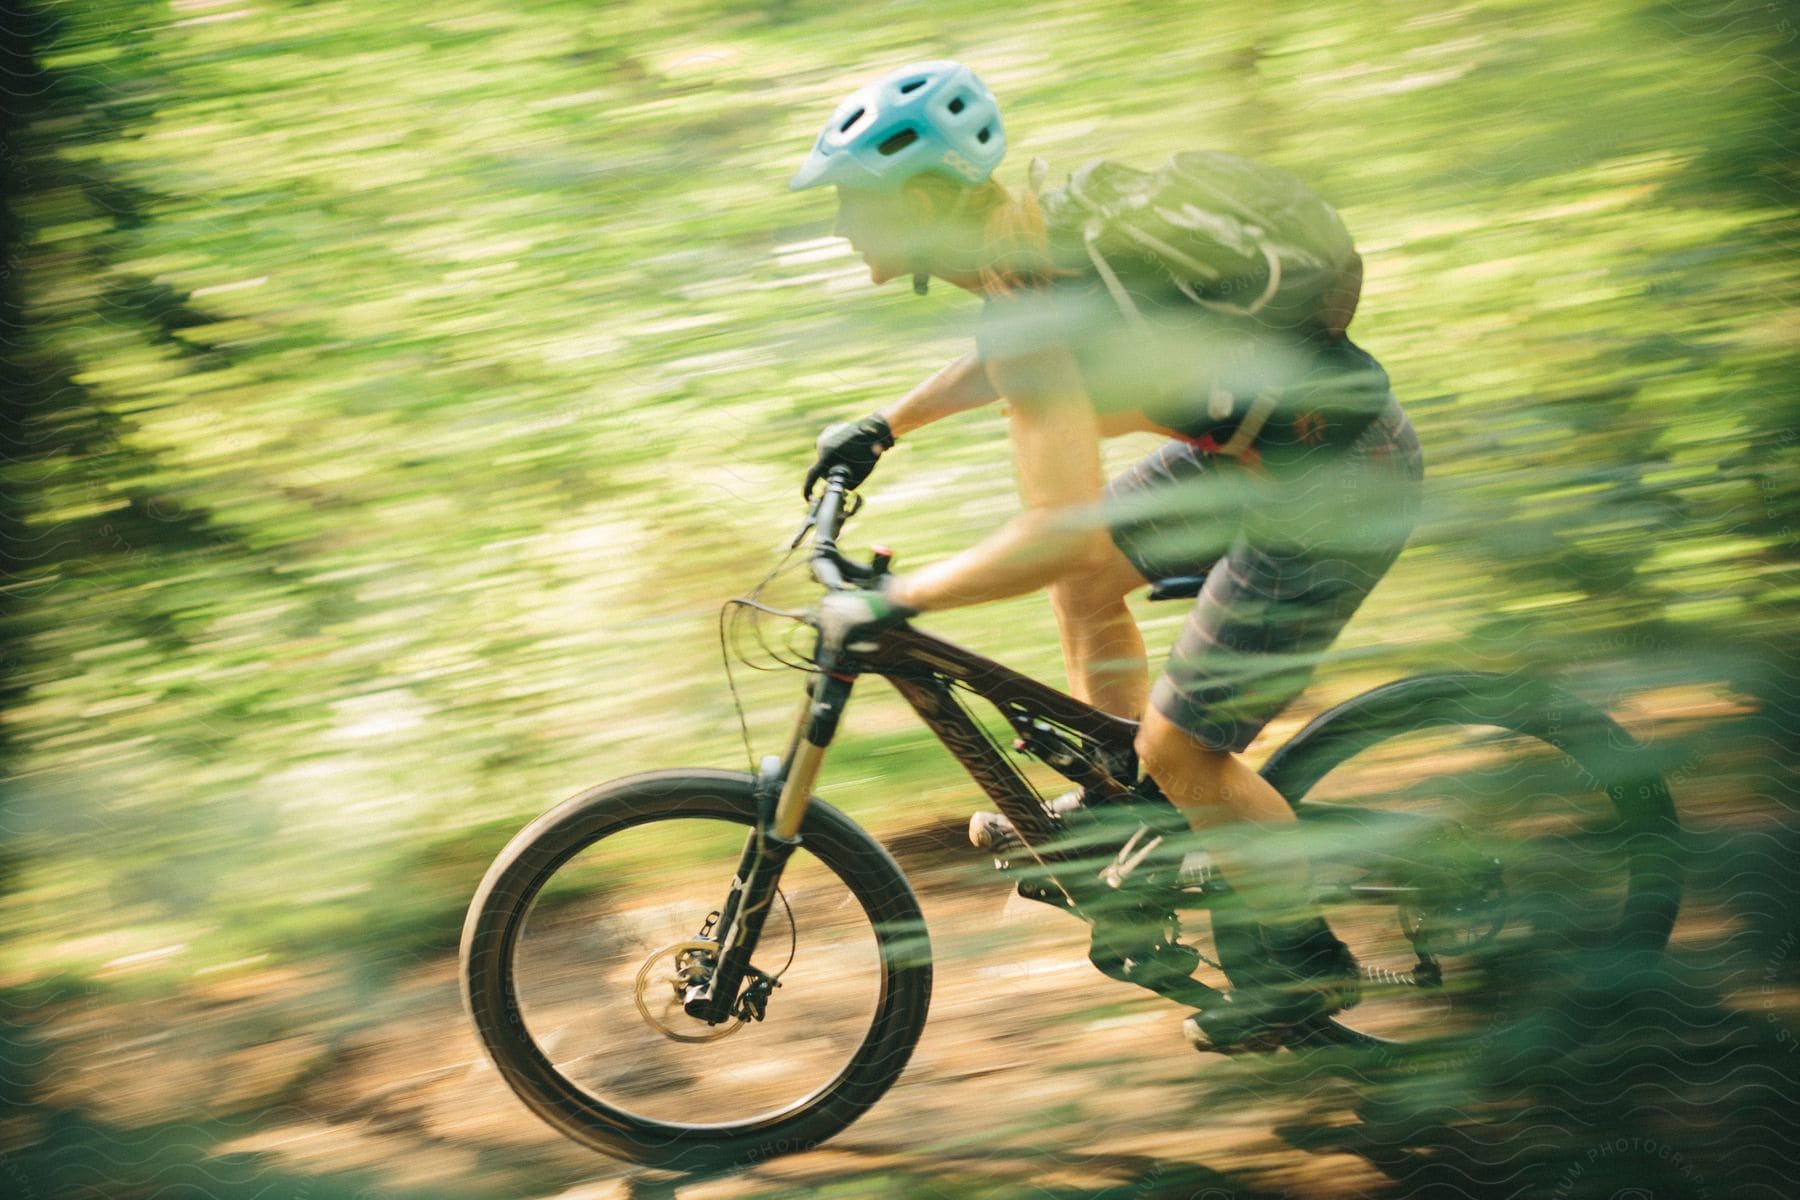 A blonde woman wearing a green tank top and grey shorts rides a mountain bike in a forest